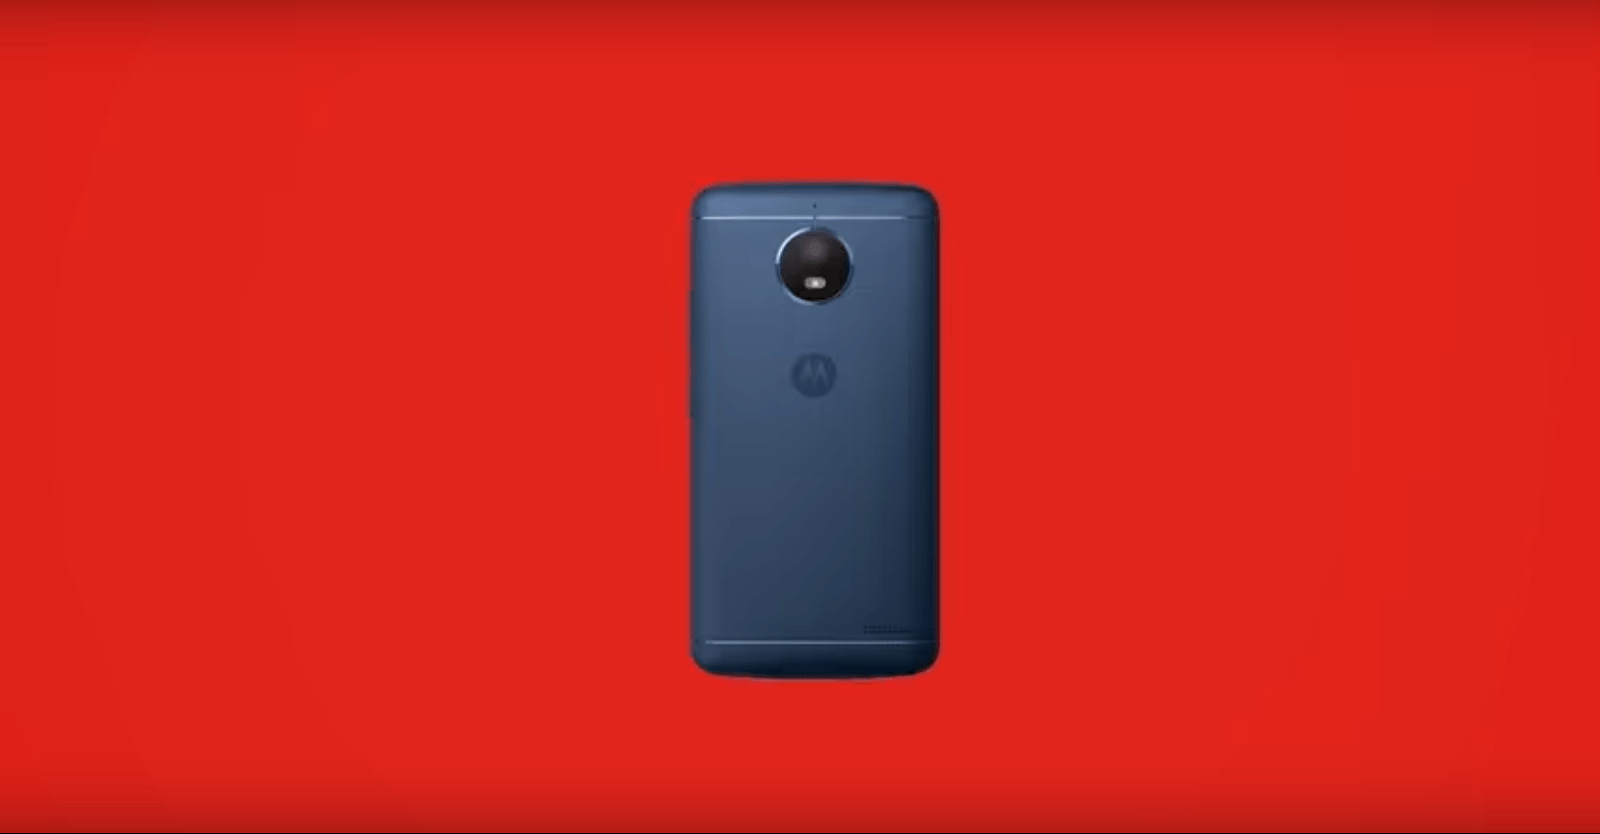 This is the Moto E4